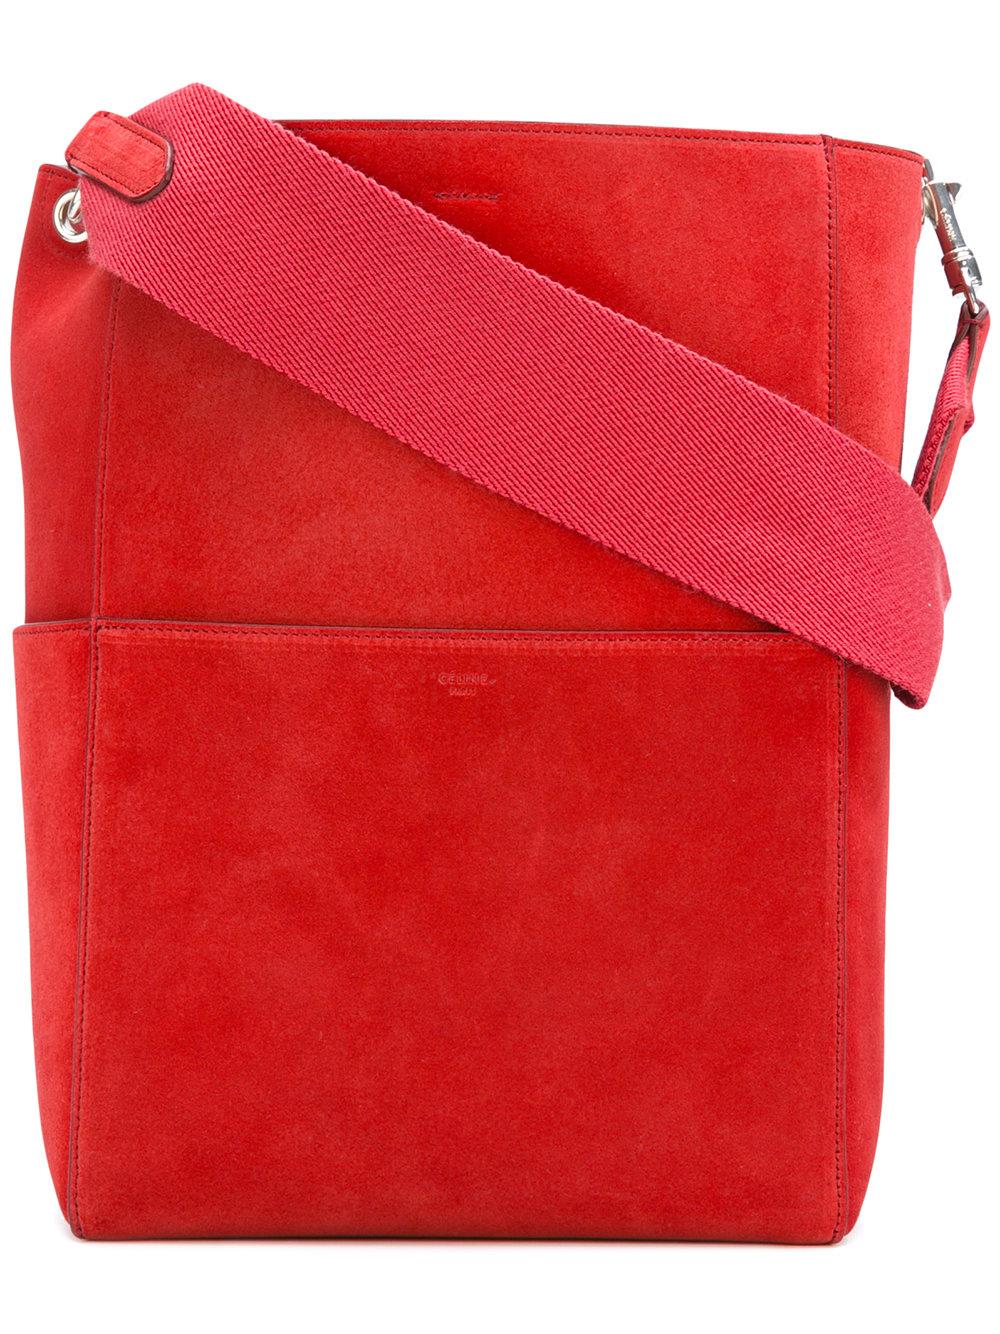 Celine - Sangle Bag - Women - Calf Leather - One Size in Red | Lyst